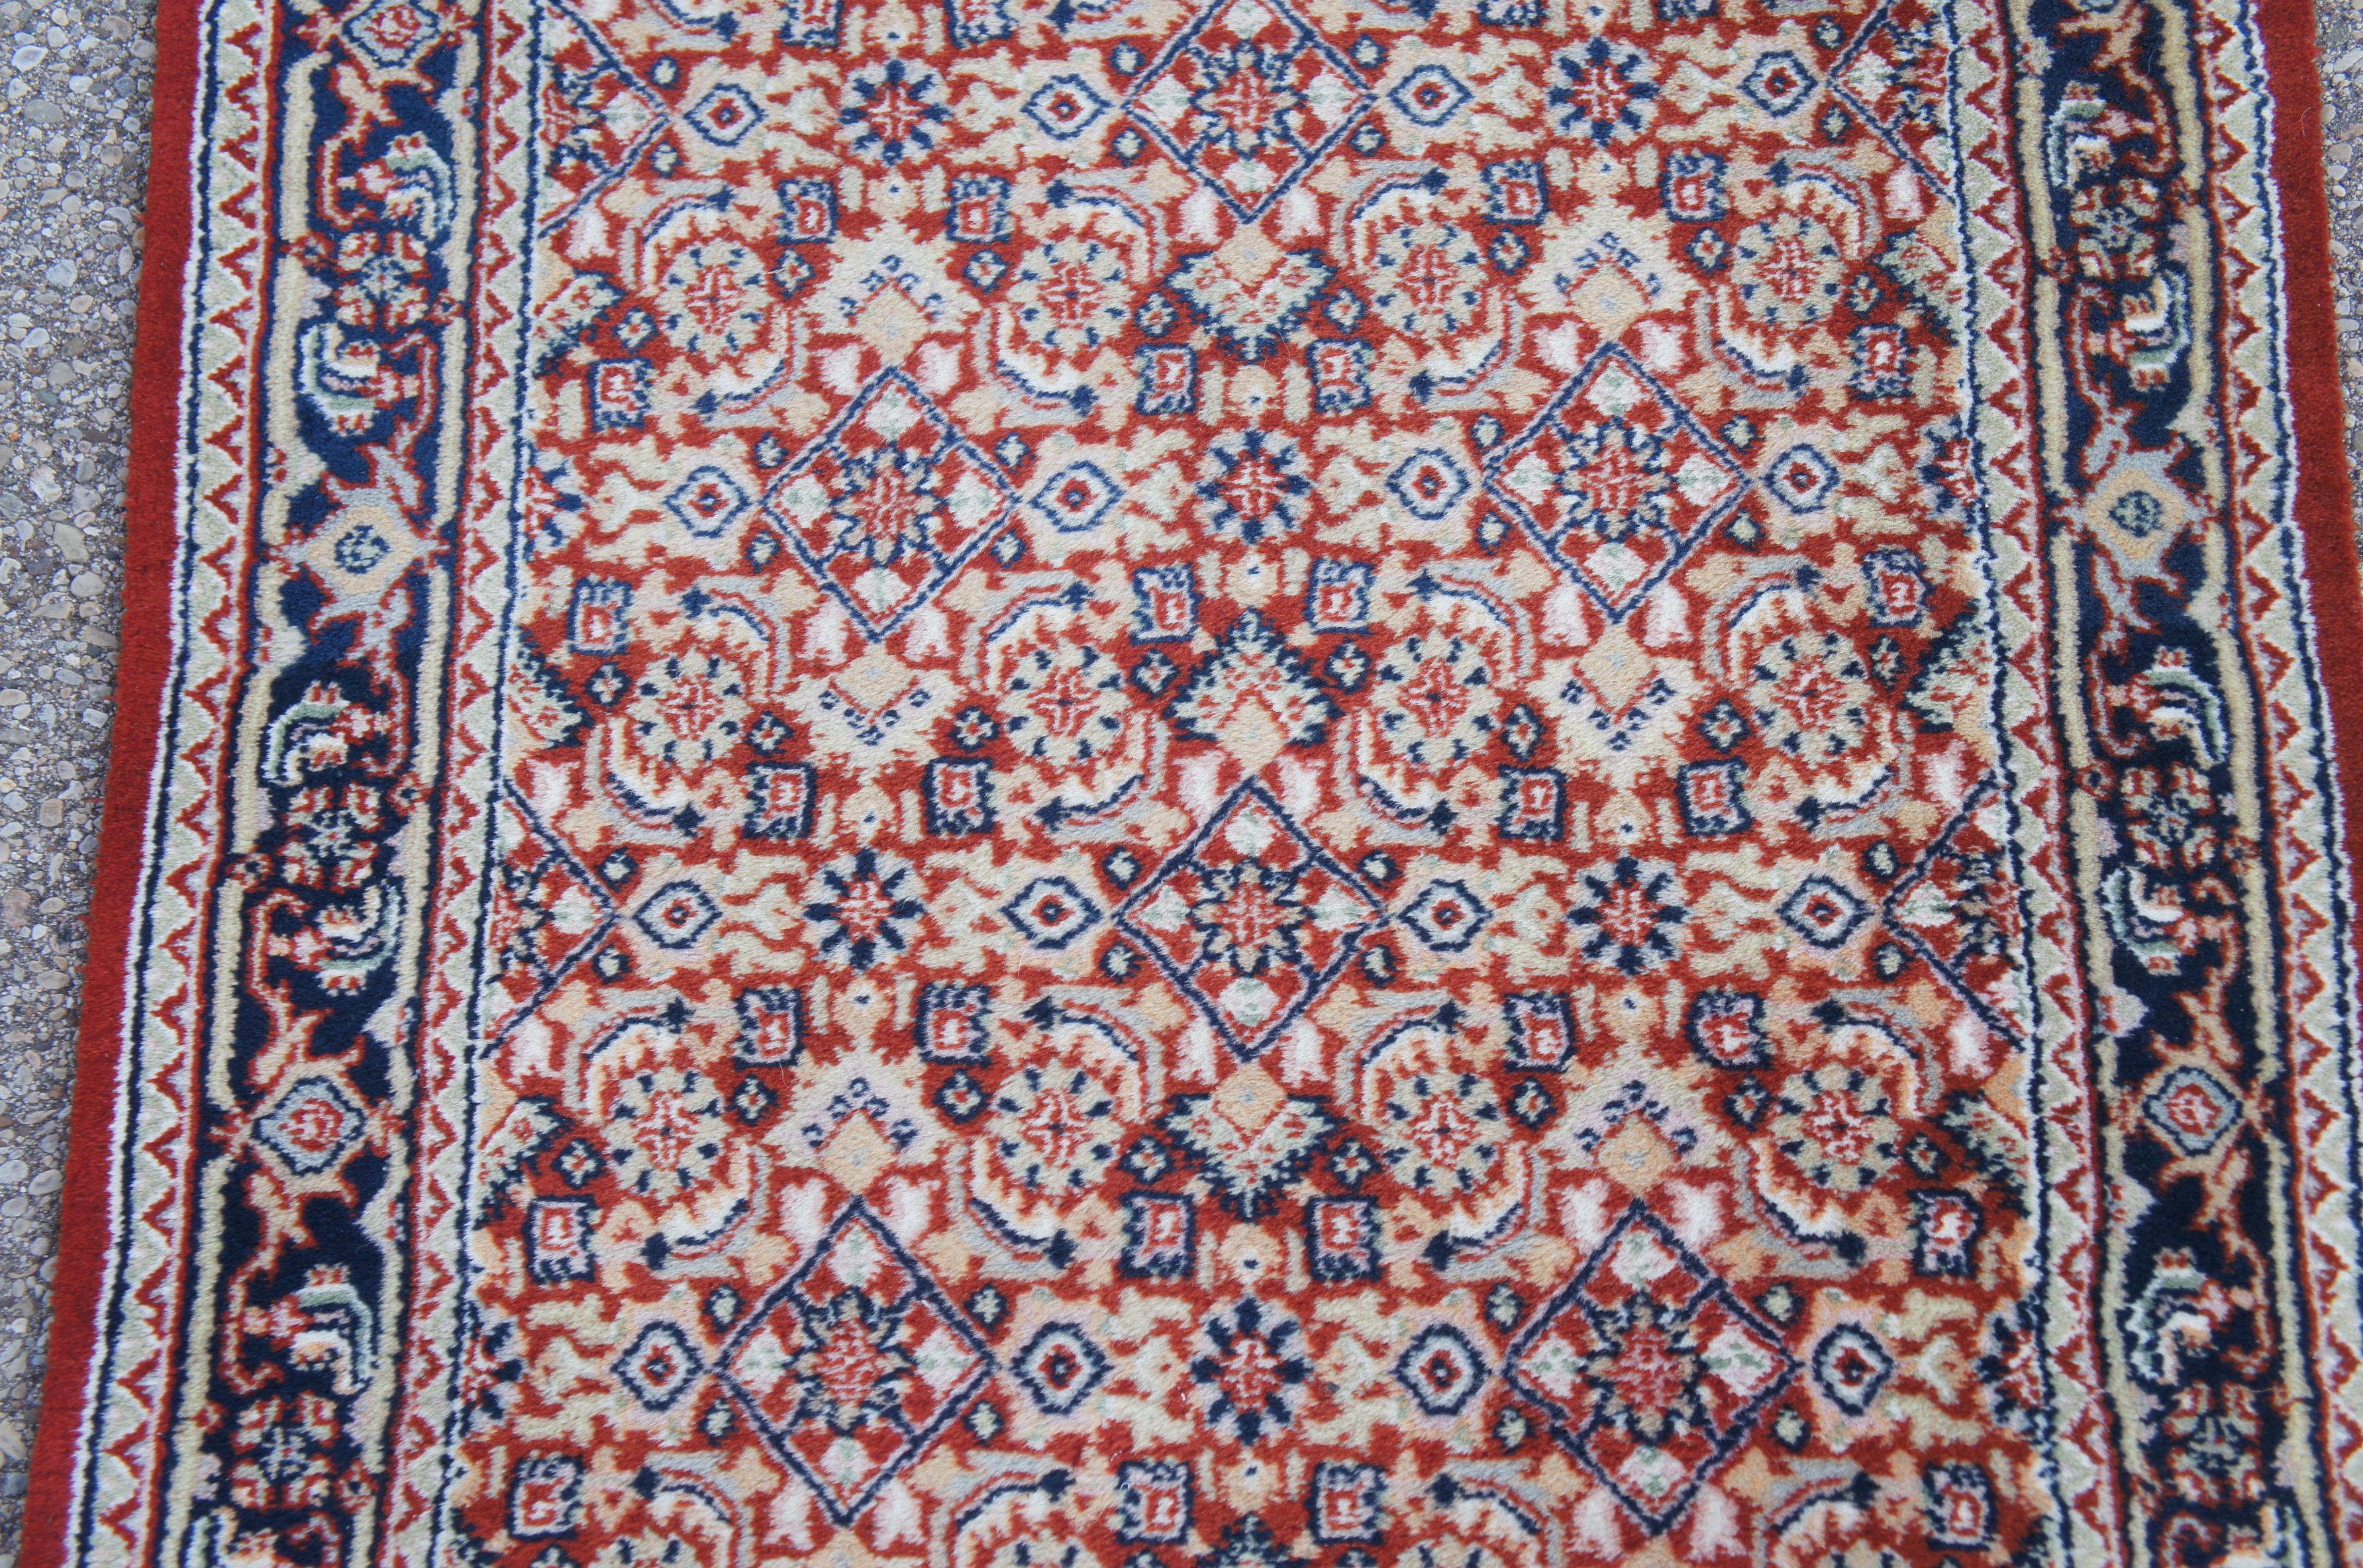 Vintage Indo-Tabriz Hand Knotted Wool Red & Blue Runner Rug 2.5' x 8' For Sale 3